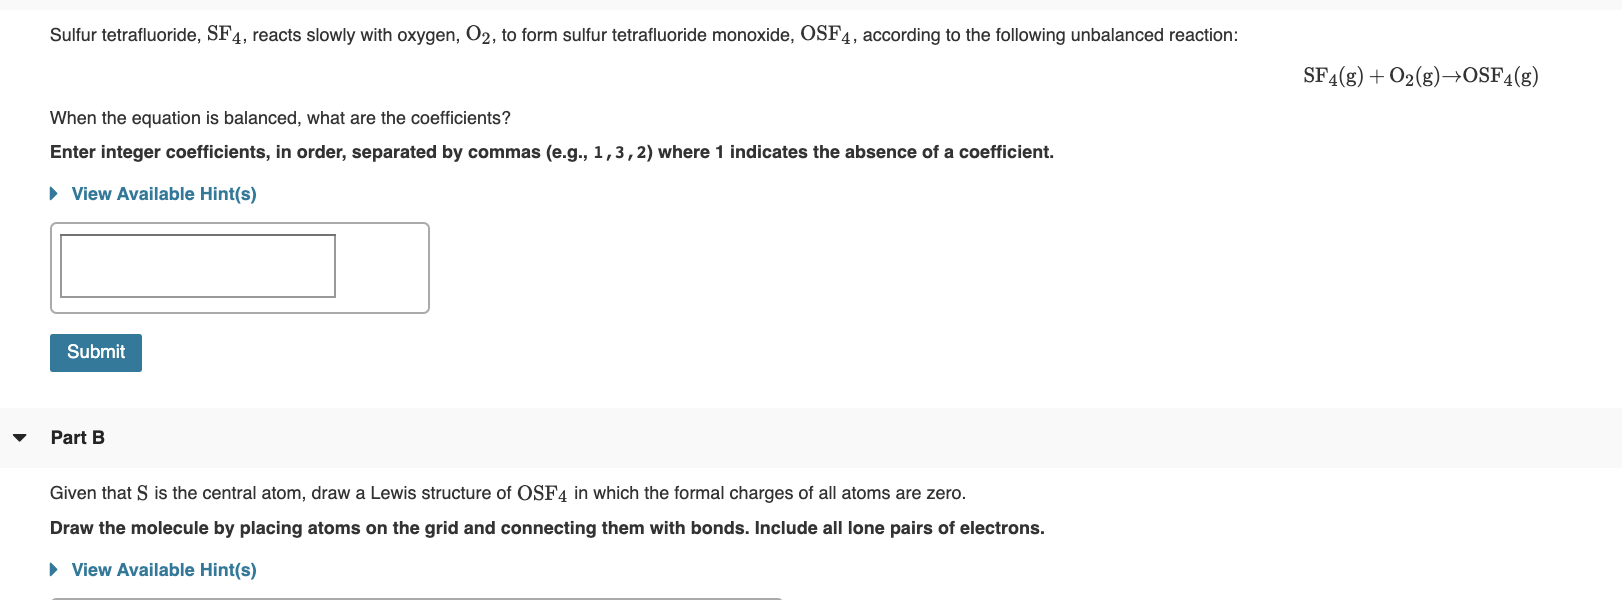 Sulfur tetrafluoride, SF4, reacts slowly with oxygen, O2, to form sulfur tetrafluoride monoxide, OSF4, according to the following
unbalanced reaction:
SF4(g) + O2(g)–→OSF4(g)
When the equation is balanced, what are the coefficients?
Enter integer coefficients, in order, separated by commas (e.g., 1,3,2) where 1 indicates the absence of a coefficient.
• View Available Hint(s)
Submit
Part B
Given that S is the central atom, draw a Lewis structure of OSF4 in which the formal charges of all atoms are zero.
Draw the molecule by placing atoms on the grid and connecting them with bonds. Include all lone pairs of electrons.
» View Available Hint(s)
